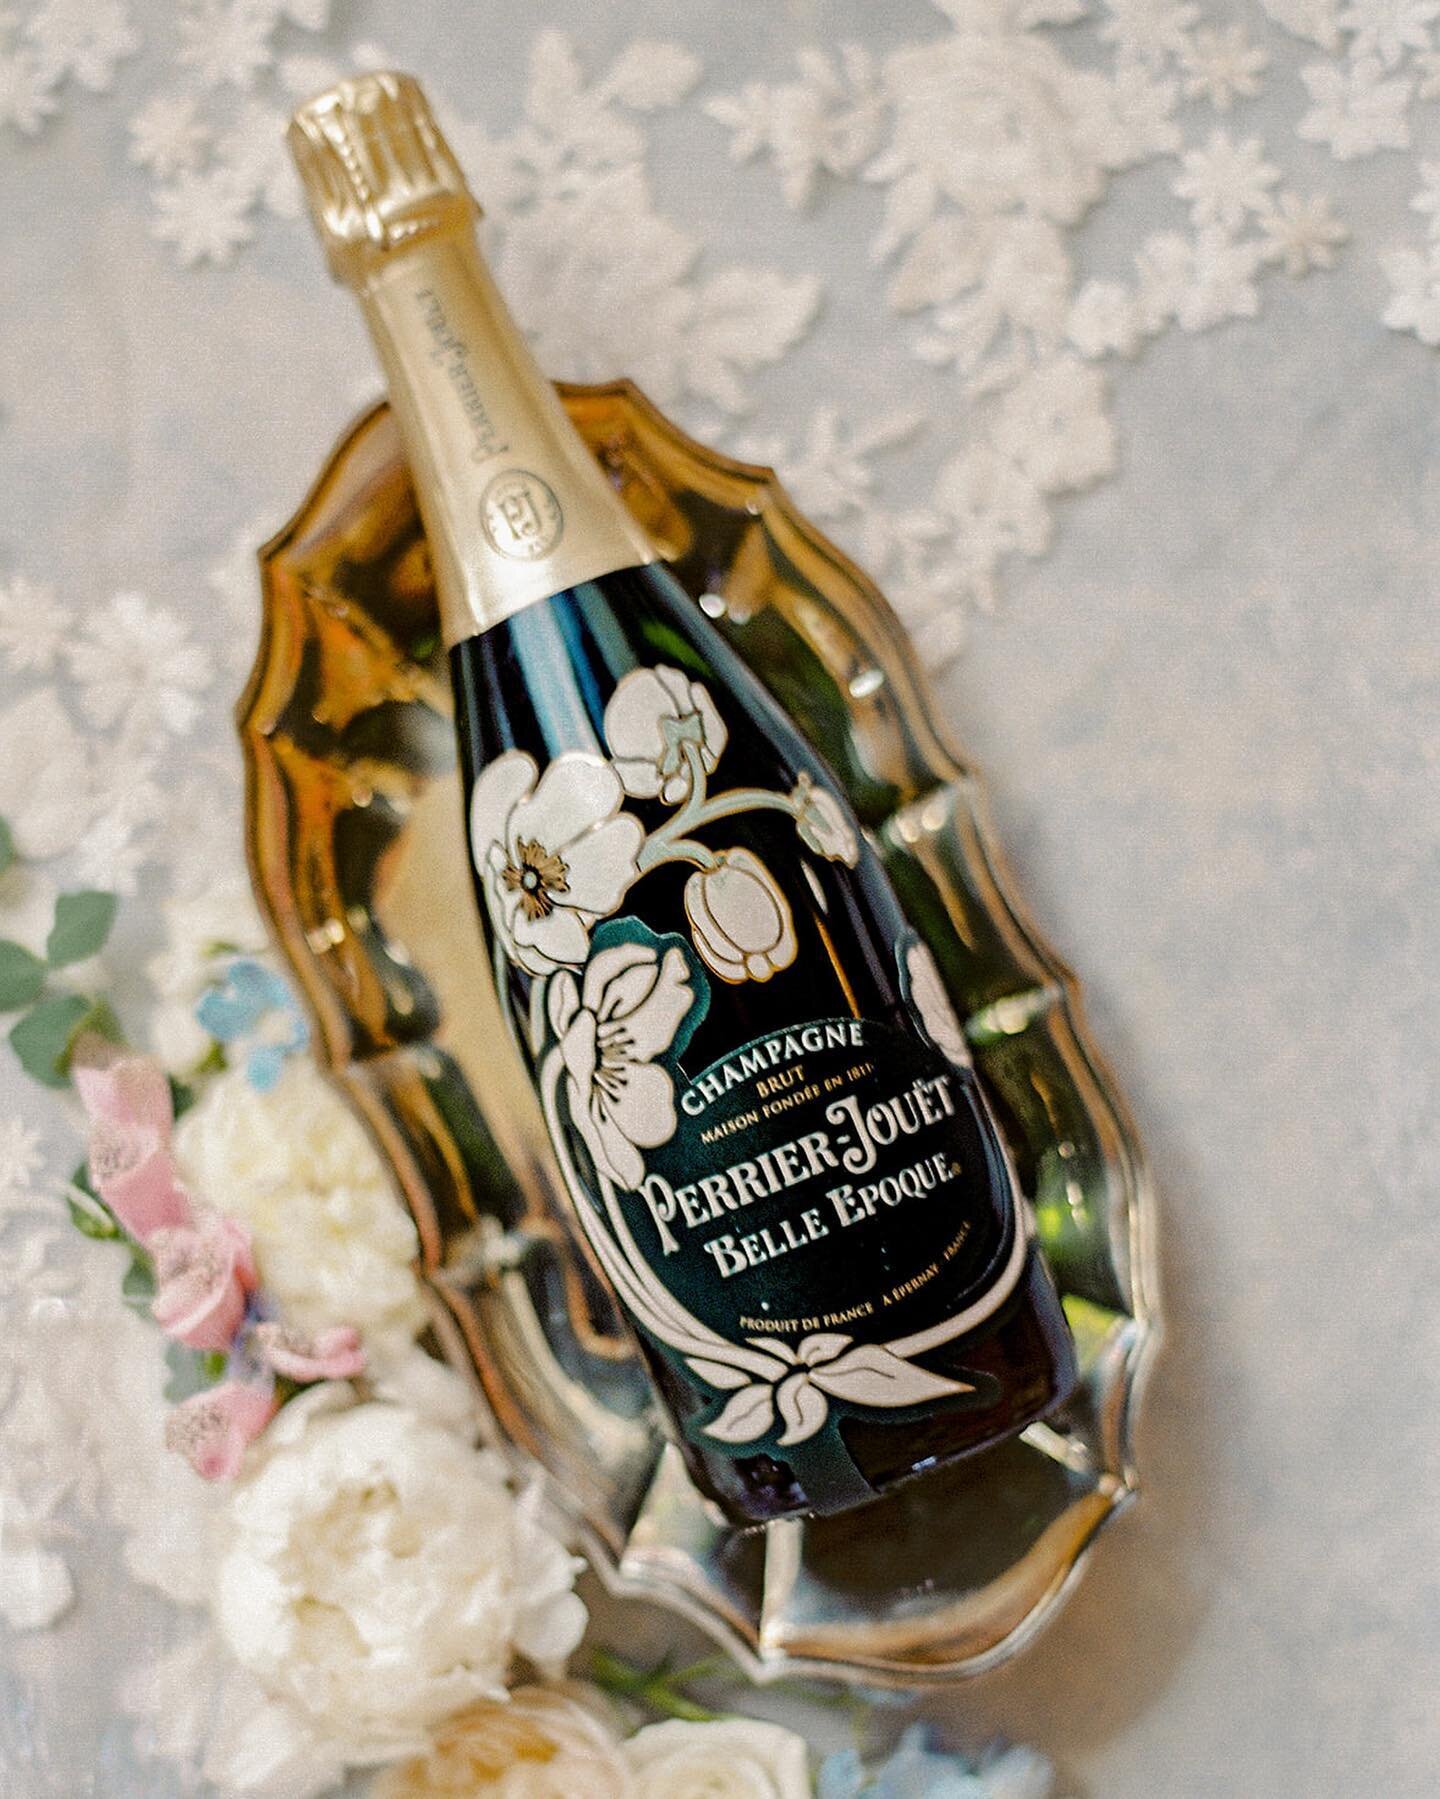 I love the small moments - hand painted champagne bottles, yes please! 

Getting ready with your favorite people is such a fun part of the day. Popping a special cork definitely helps!

Venue @devilsthumbranchweddings
Photographer @alpandisle
Florist